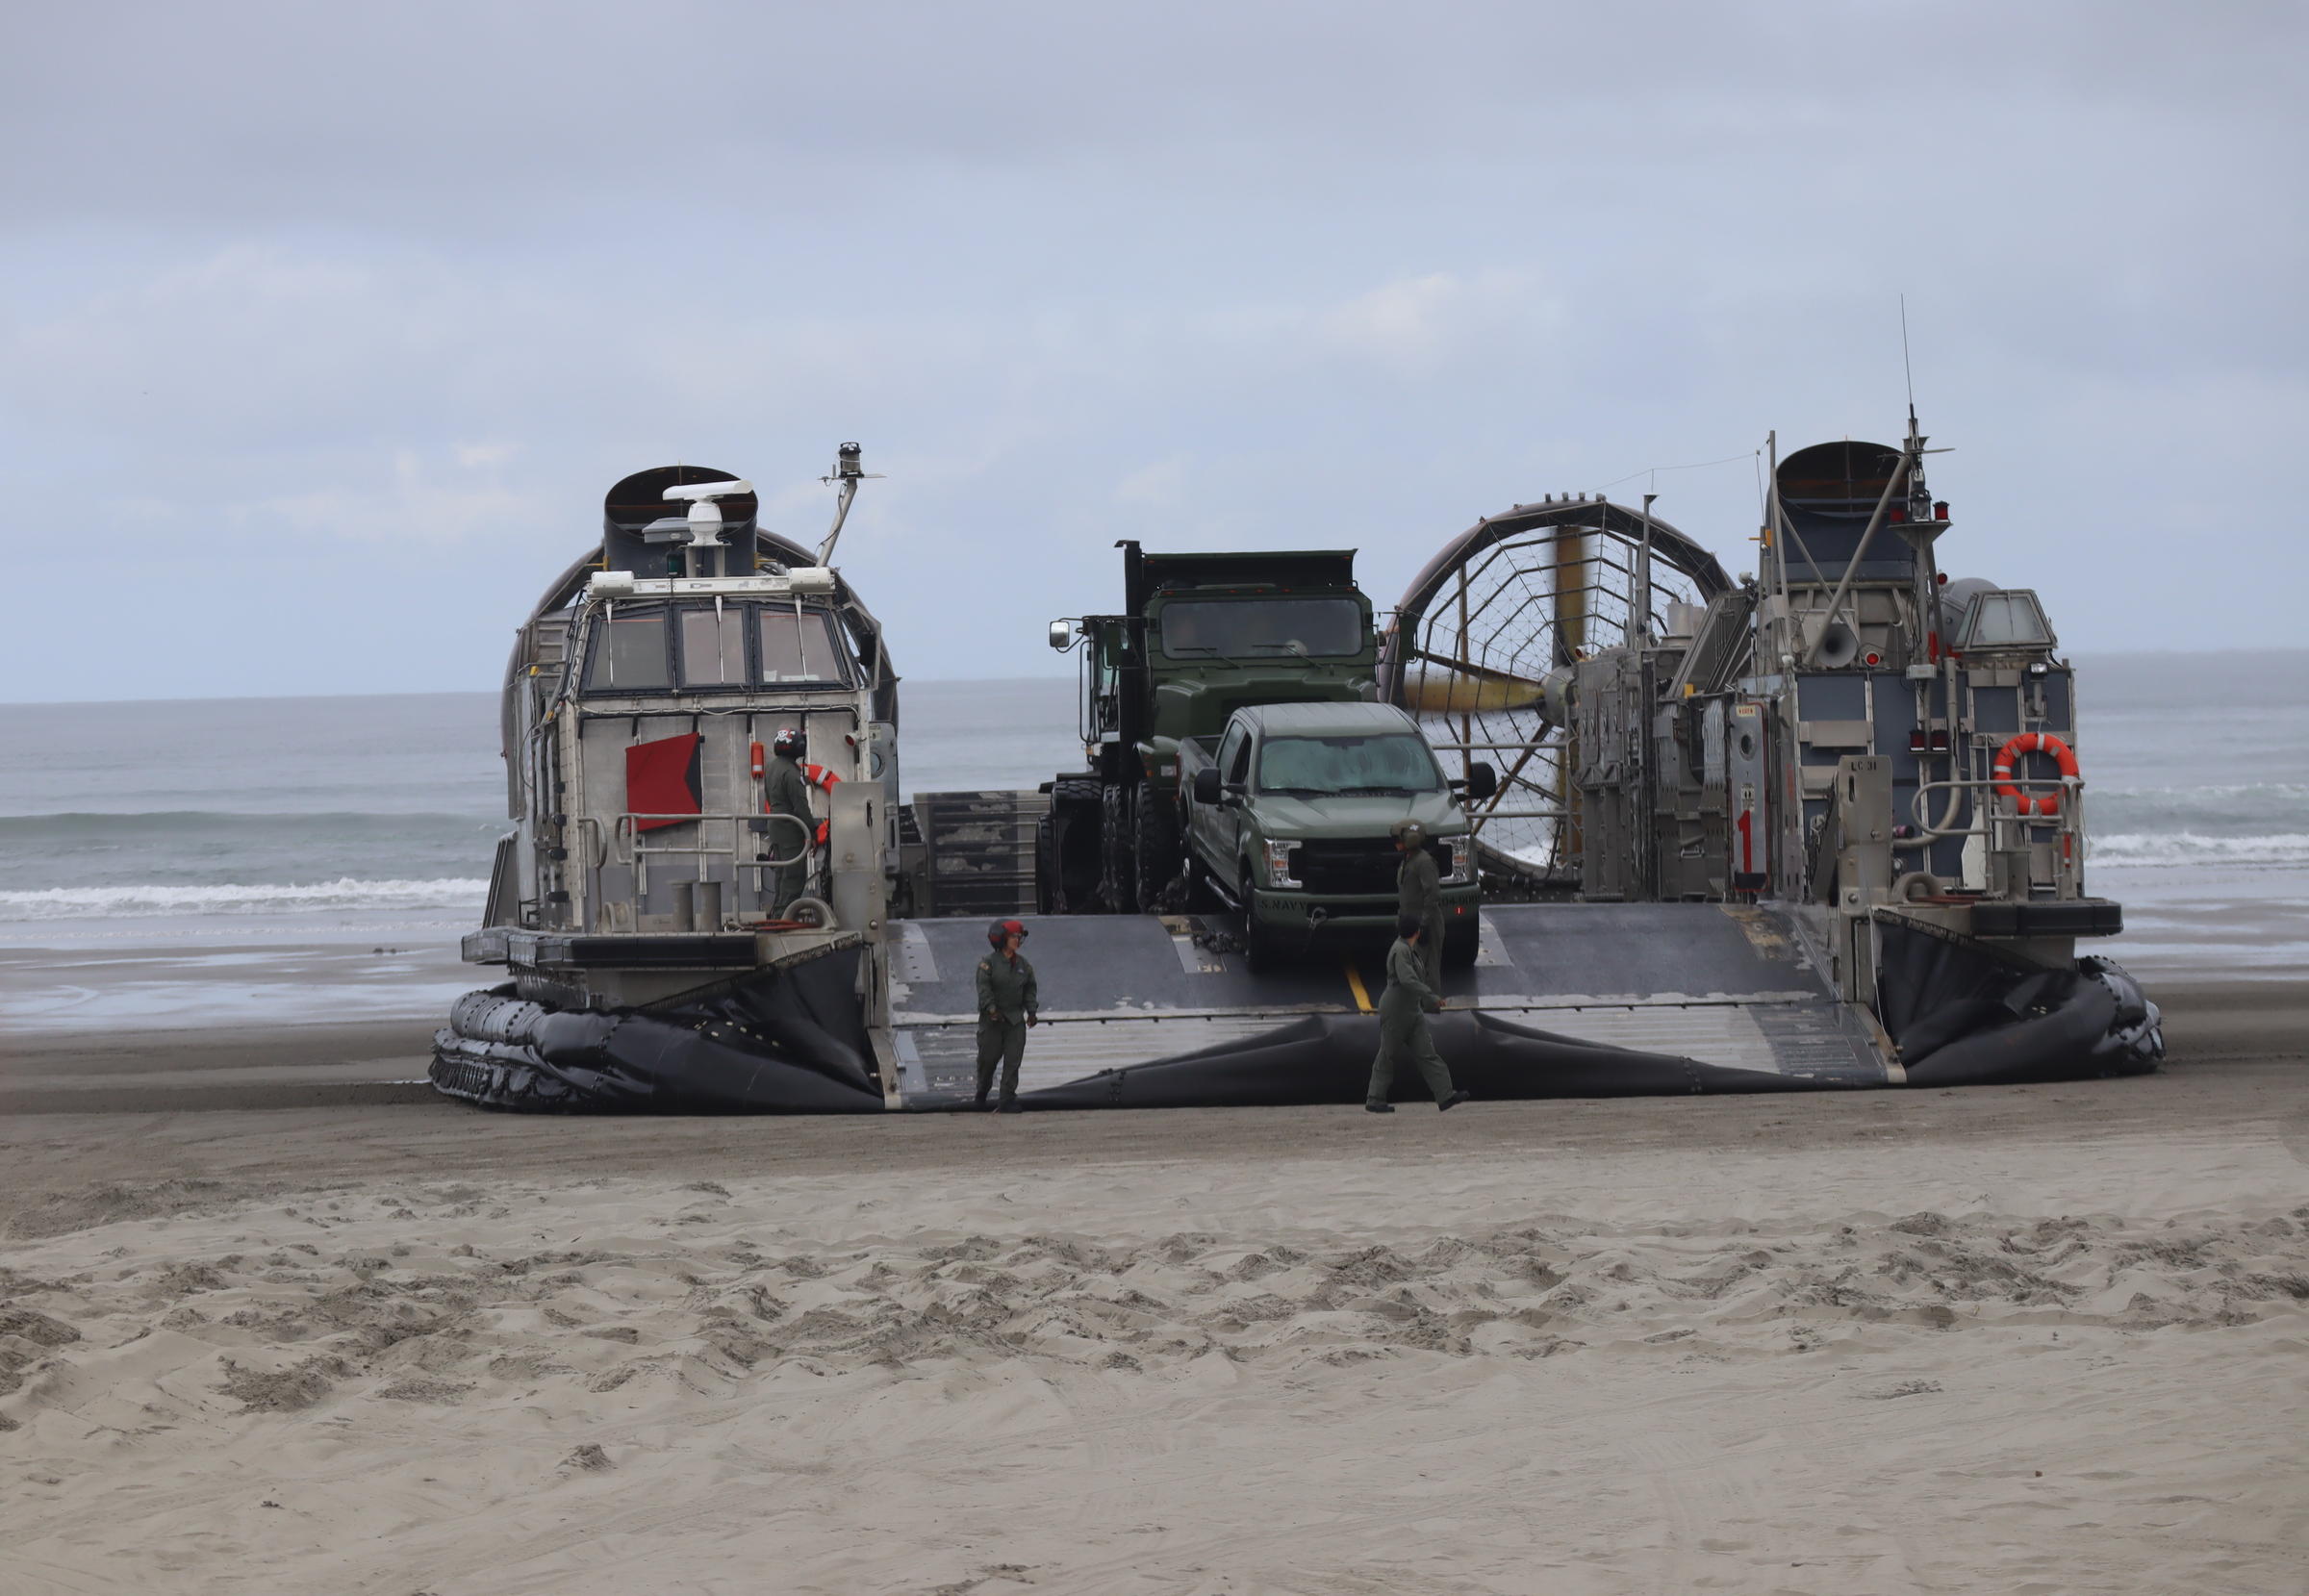 Navy hovercrafts deliver equipment, meant to clear roadways, during a mock Cascadia earthquake preparedness demonstration Monday. CREDIT TOM BANSE / NORTHWEST NEWS NETWORK